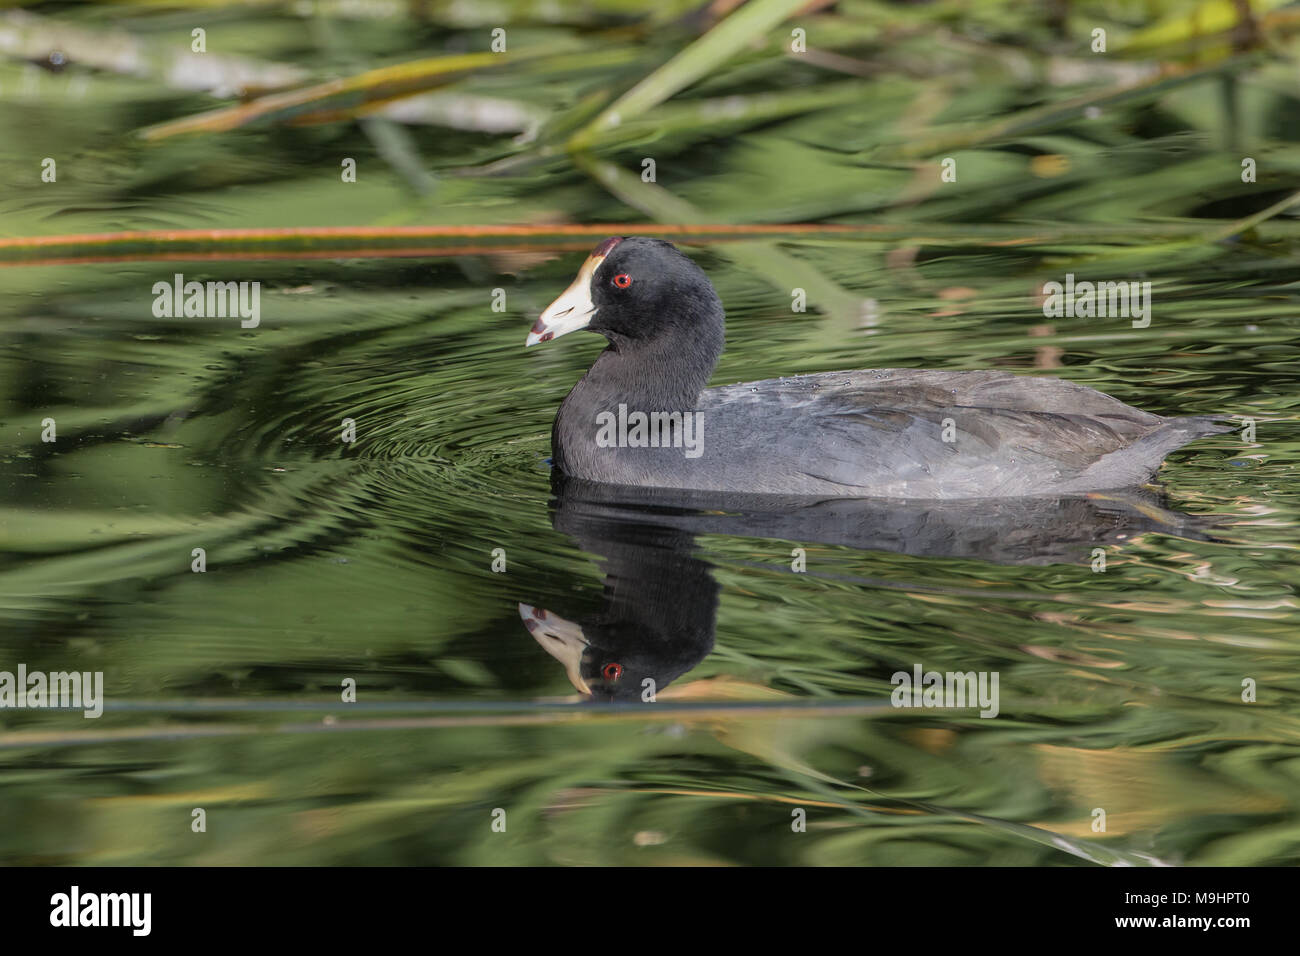 American coot with reflection in green water. Stock Photo